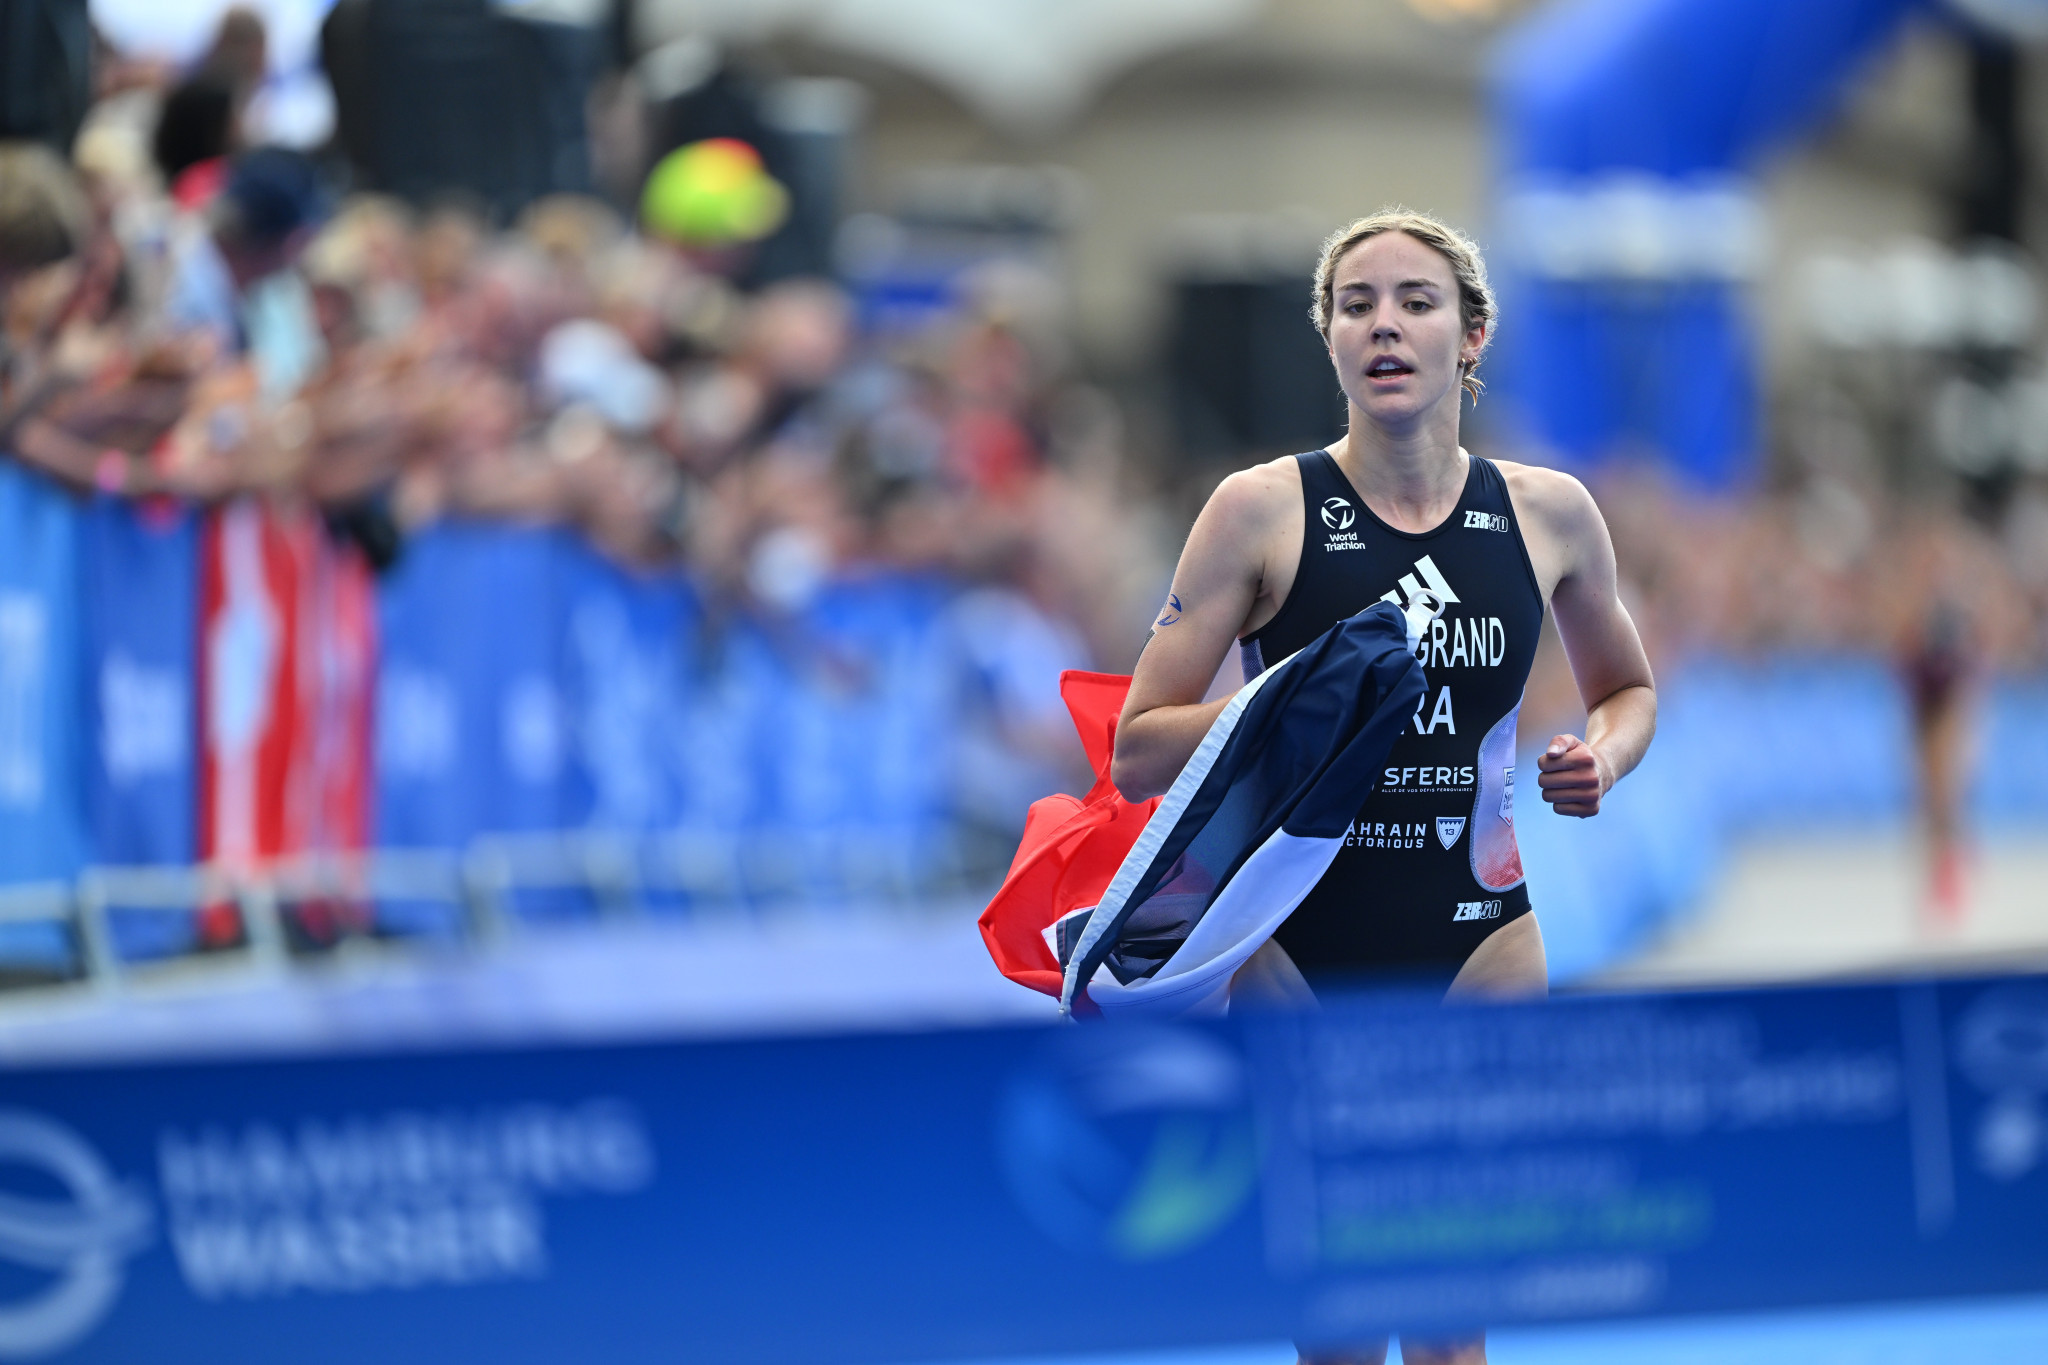 Cassandre Beaugrand then won the women's super-sprint title with a remarkable 10-second gap ahead of the rest of the field ©World Triathlon